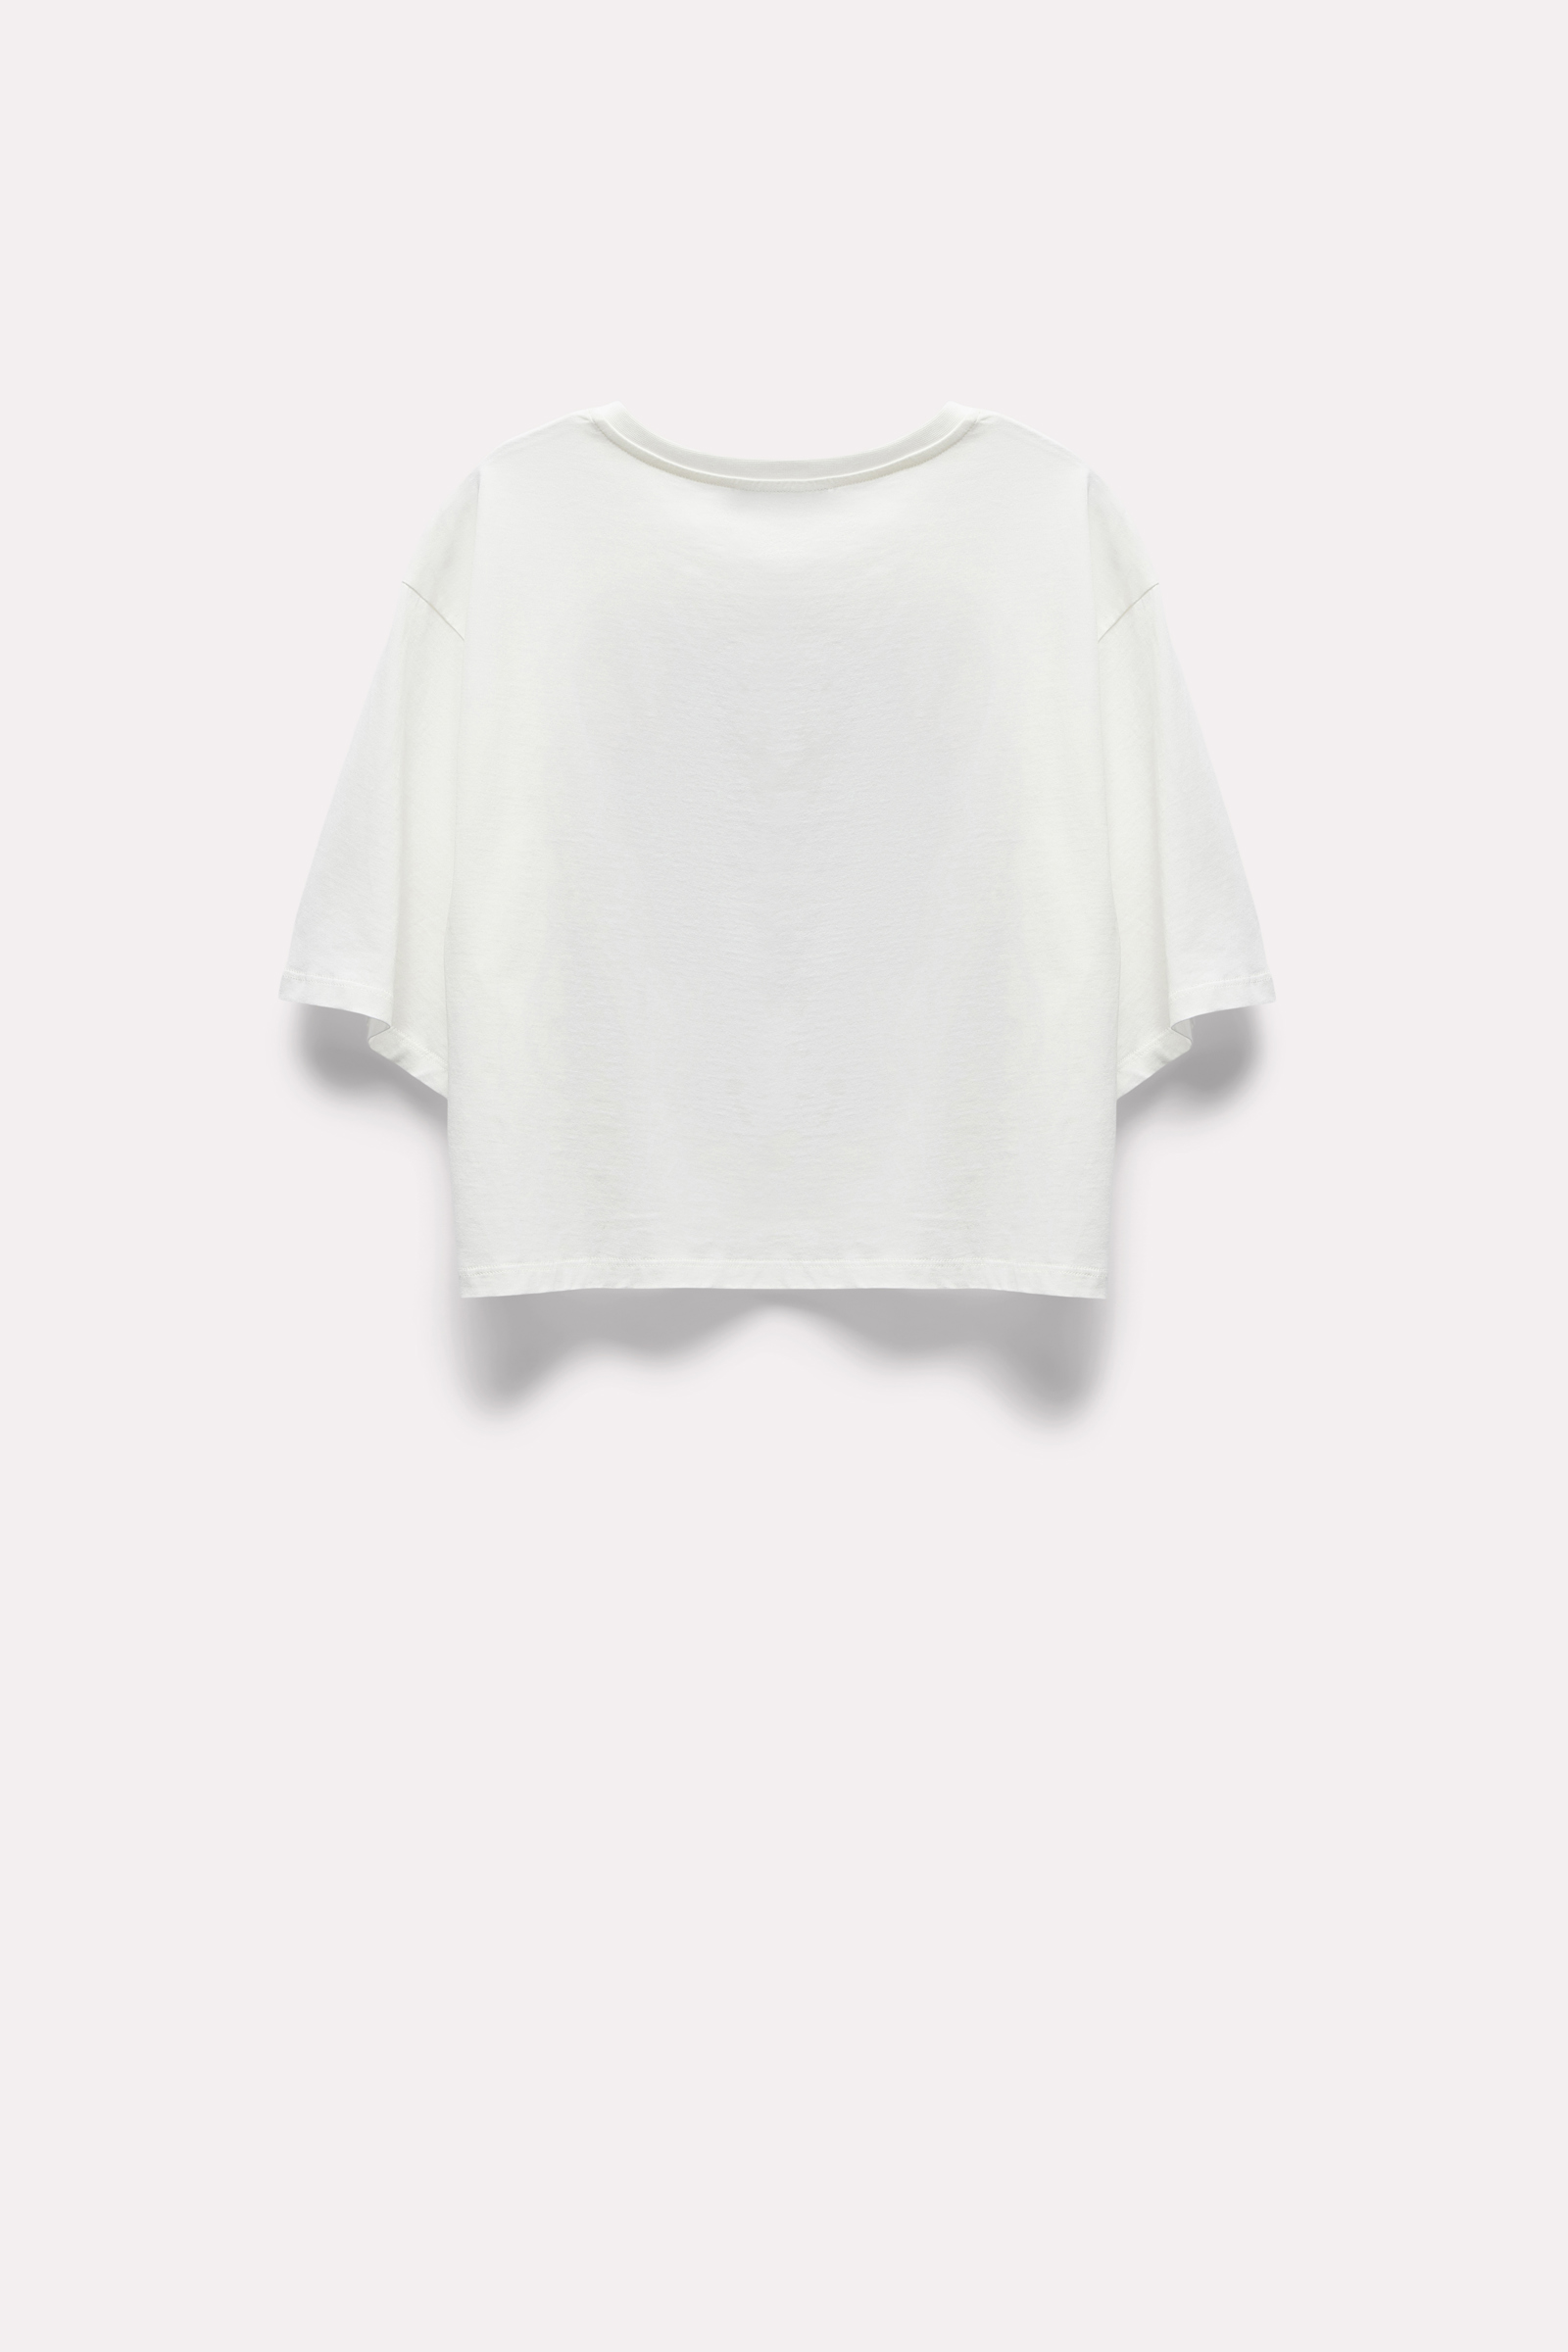 Dorothee Schumacher Out there dreaming T-Shirt camellia white